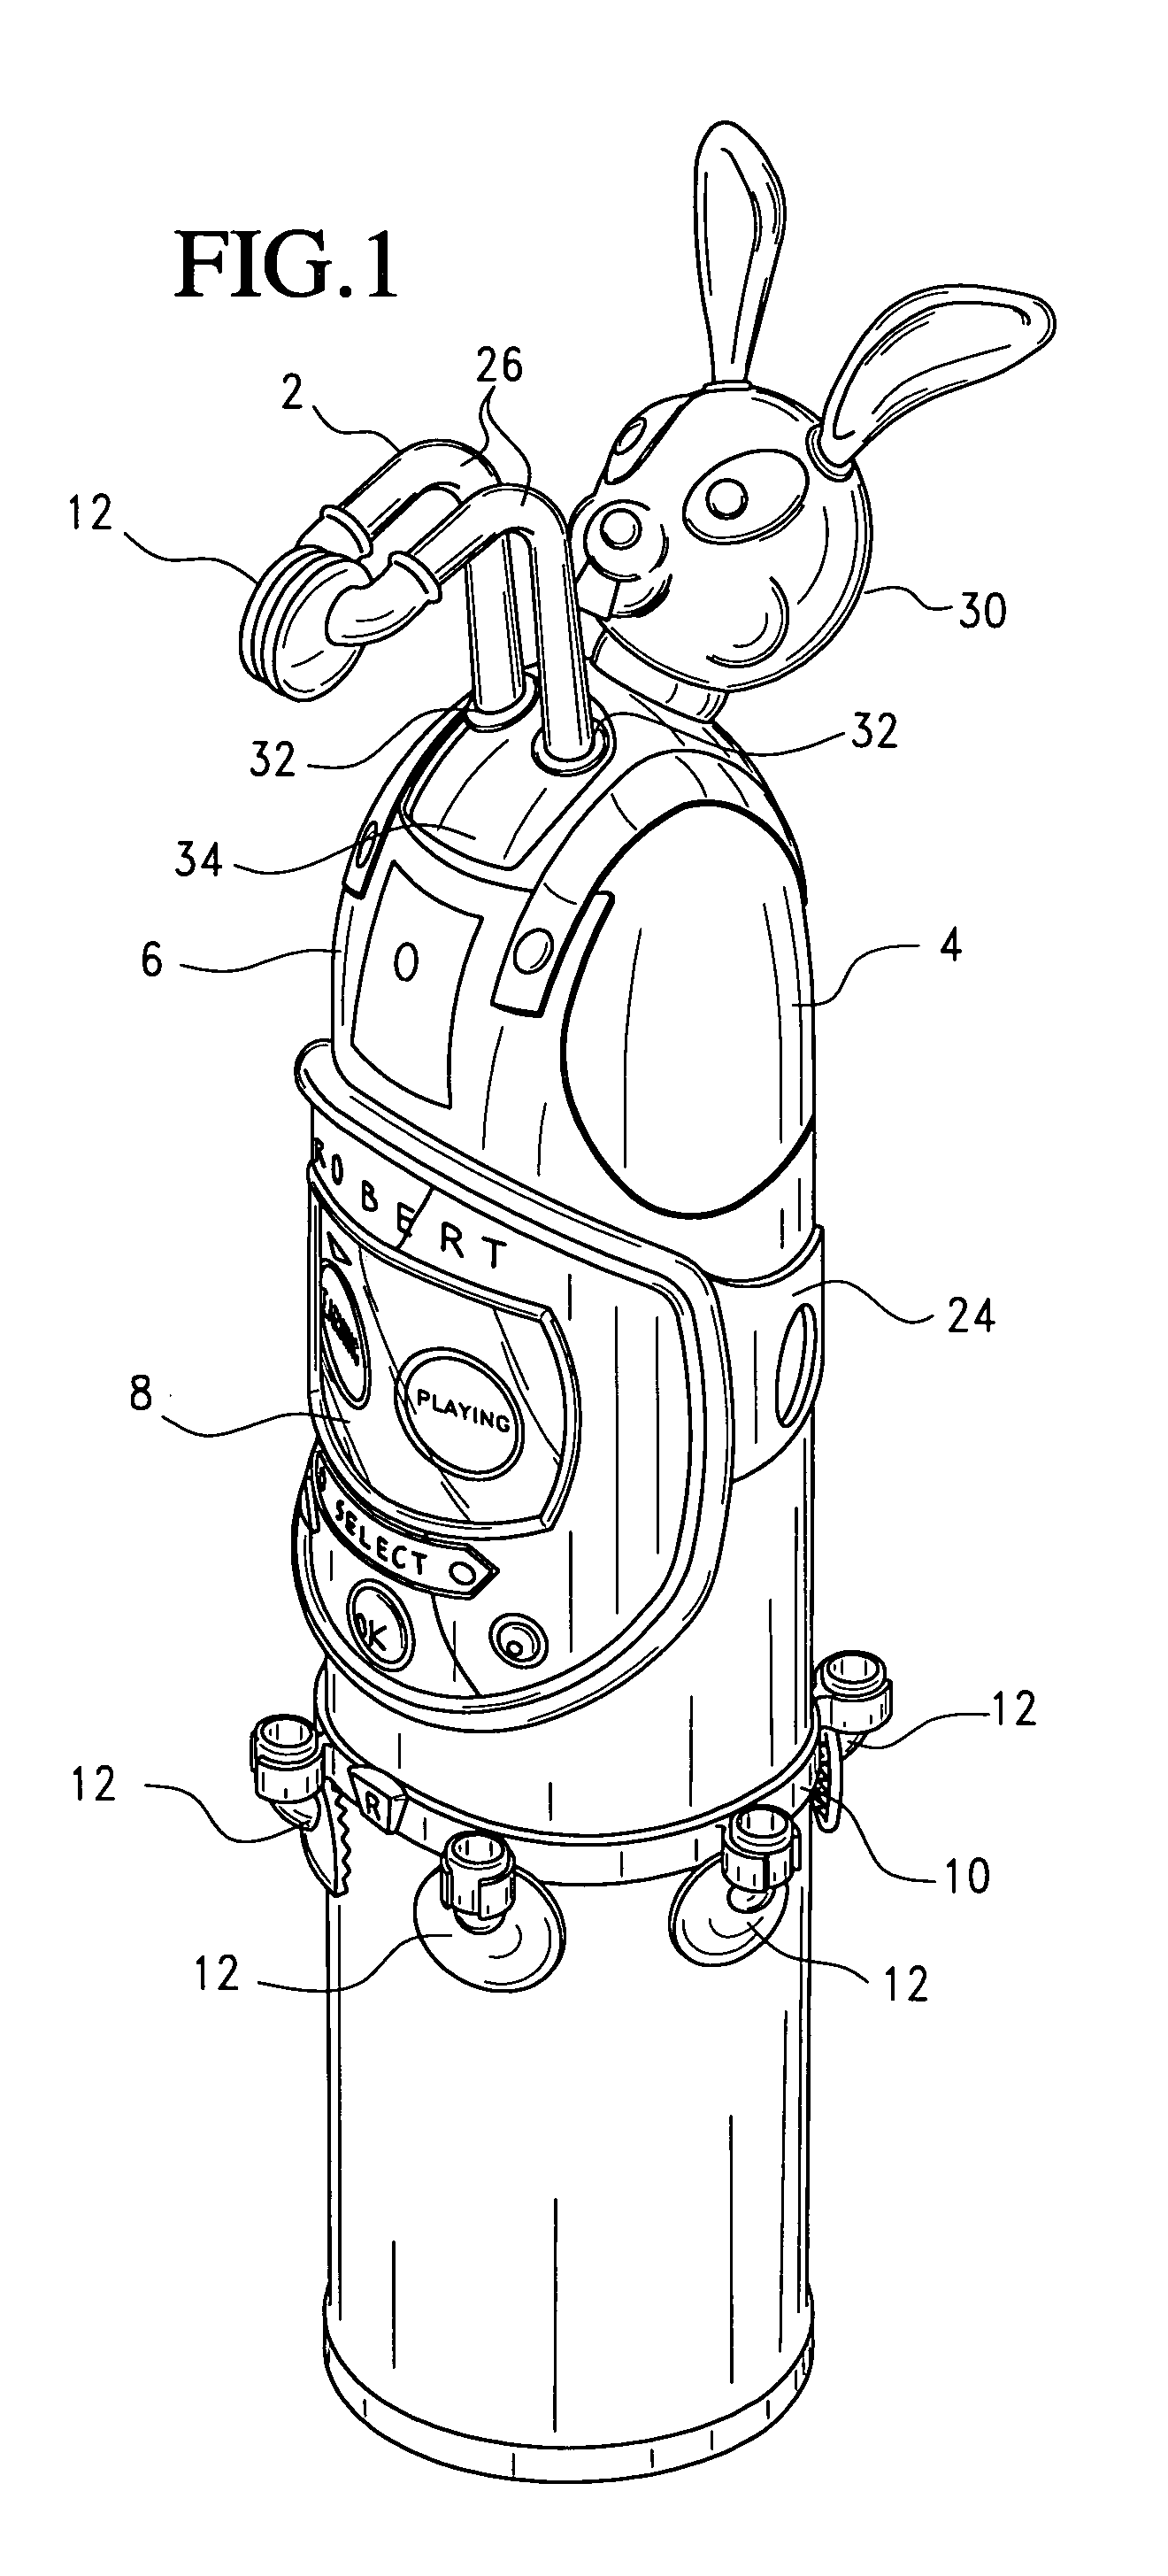 Educational prosthesis device and method for using the same